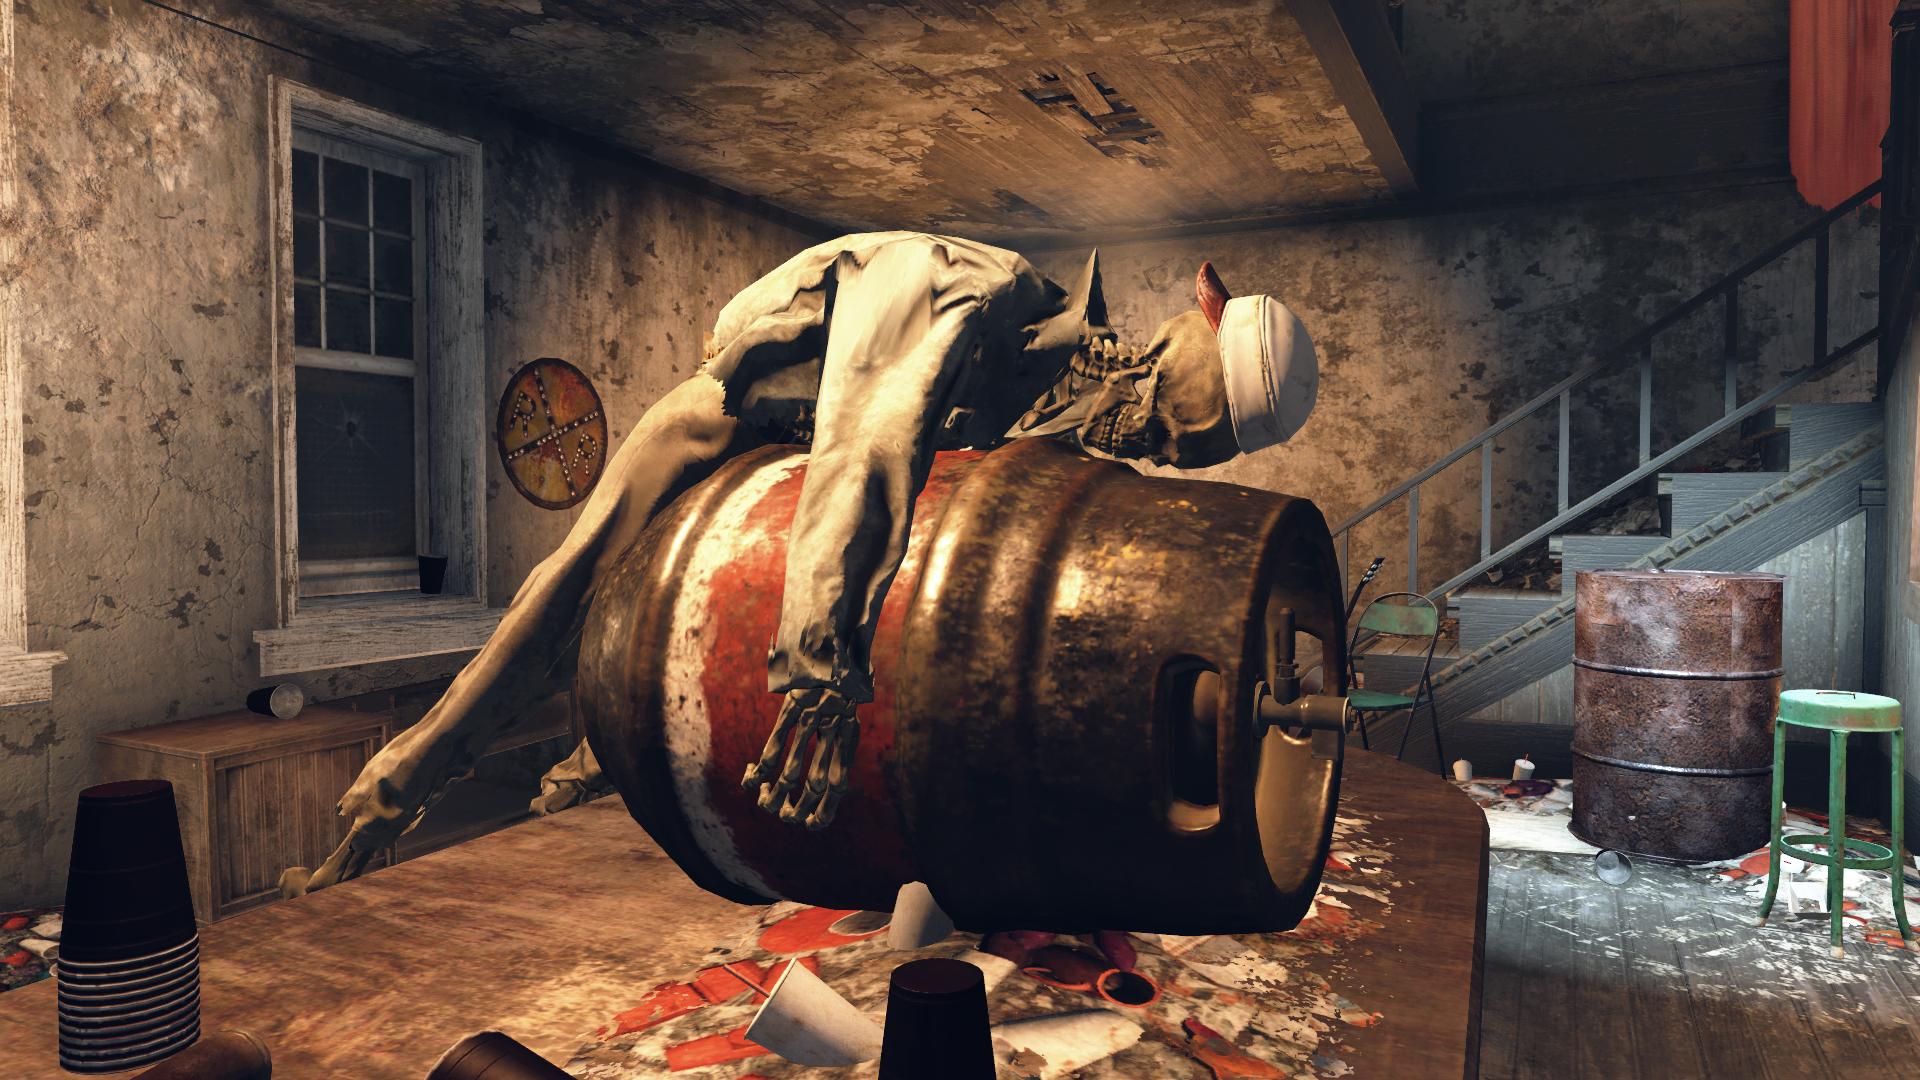 Fallout 76 State of the Game - a skeleton draped over a large beer keg on a table